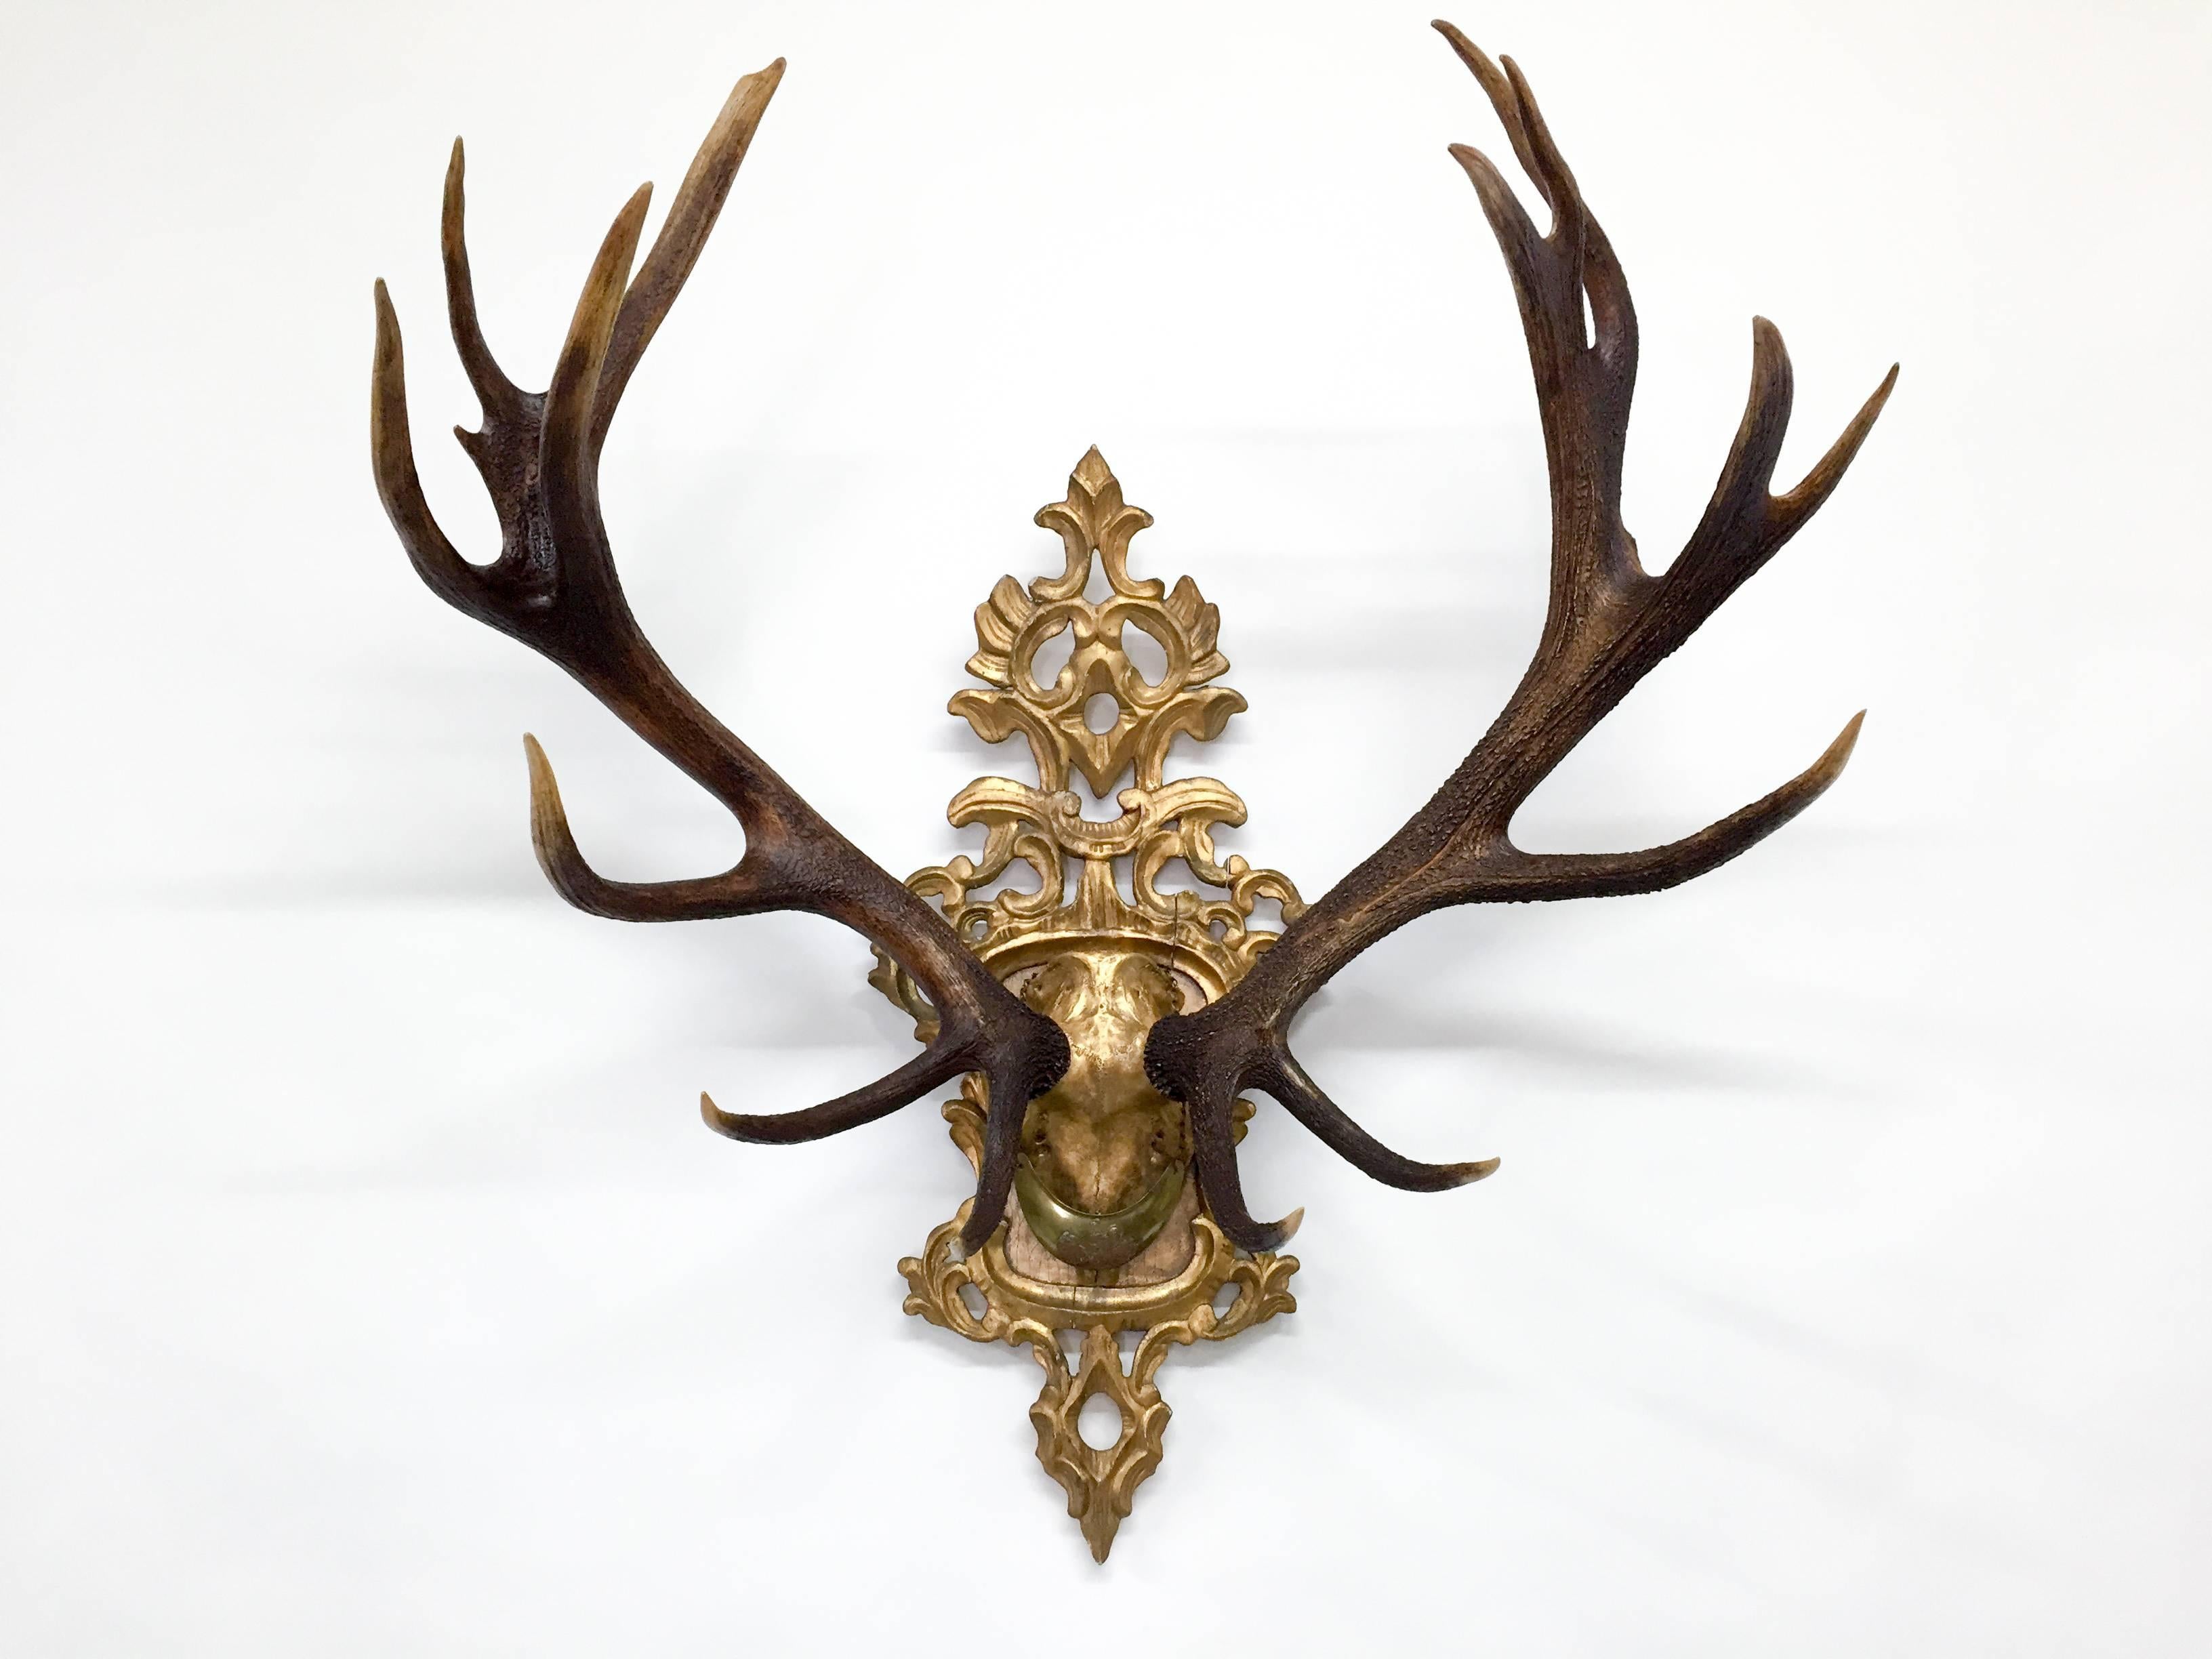 19th century Habsburg Red Stag trophy from Emperor Franz Joseph's castle at Eckartsau in the Southern Austrian Alps, a favorite hunting schloss of the Habsburg Royal family. This historic hunting trophy features the hand-carved gilt plaque and an